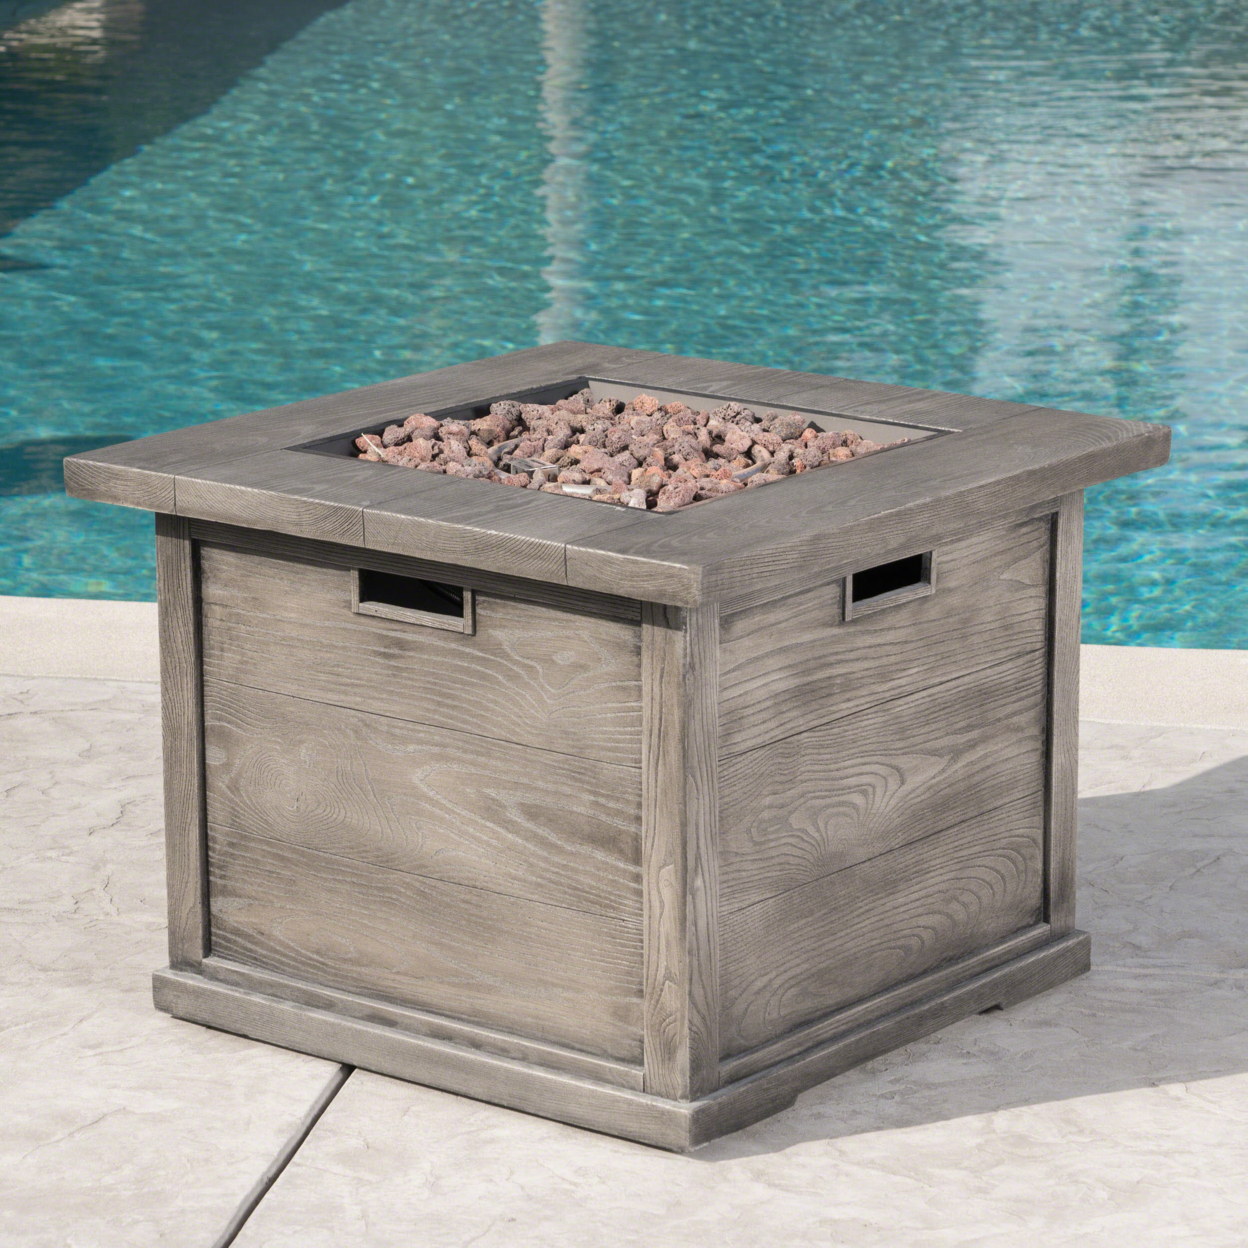 Ellesmere Outdoor Wood Patterned Square Gas Fire Pit - Gray Wood Pattern